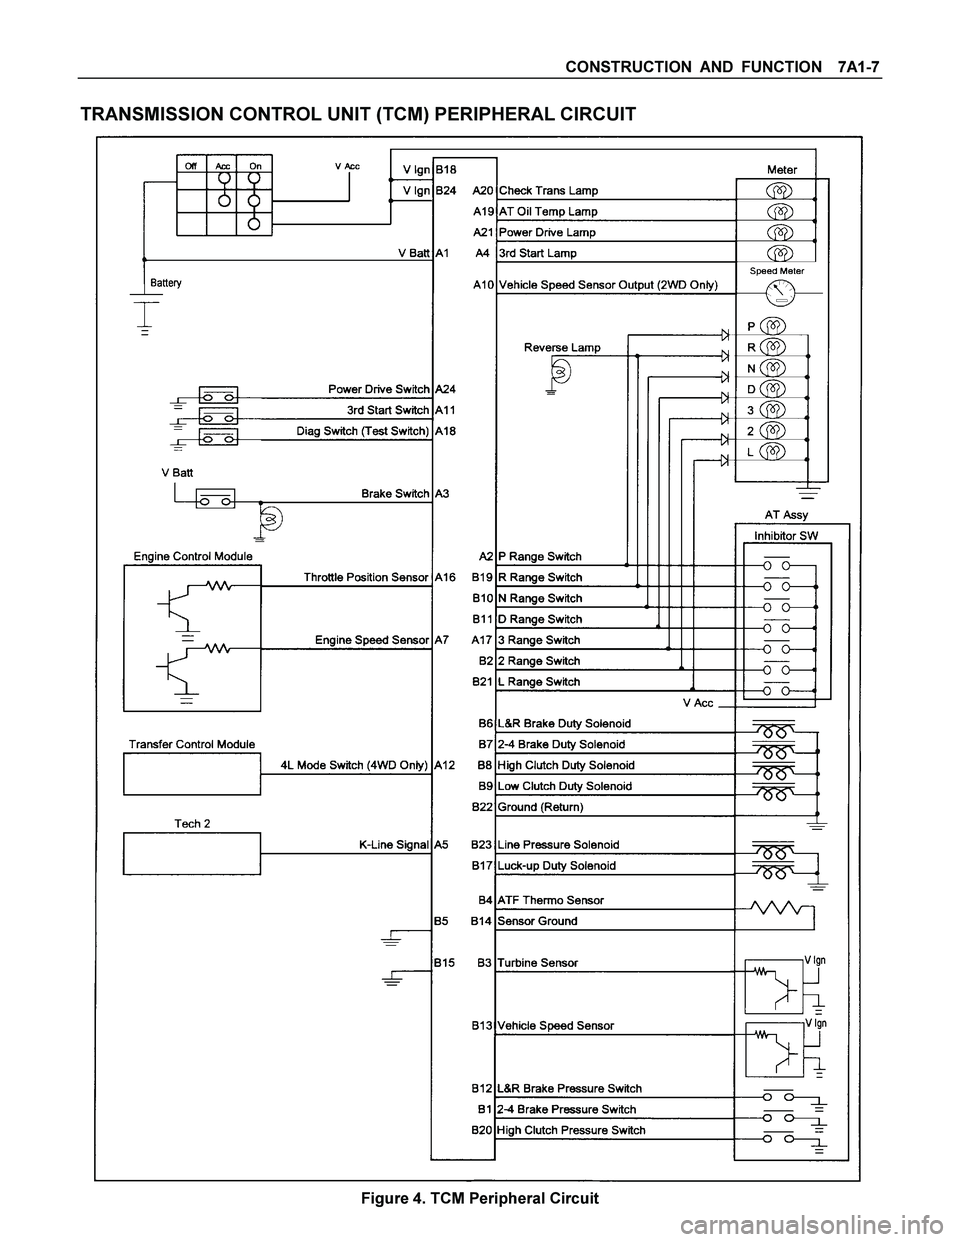 ISUZU TF SERIES 2004  Workshop Manual CONSTRUCTION AND FUNCTION  7A1-7 
 
TRANSMISSION CONTROL UNIT (TCM) PERIPHERAL CIRCUIT 
 
 
 
 
 
 
 
 
 
 
 
 
 
 
 
 
 
 
 
 
 
 
 
 
 
 
 
 
 
 
 
 
 
 
 
 
 
 
 
 
 
 
 
 
 
 
 
 
 
 
 
 
 
 
 
 
